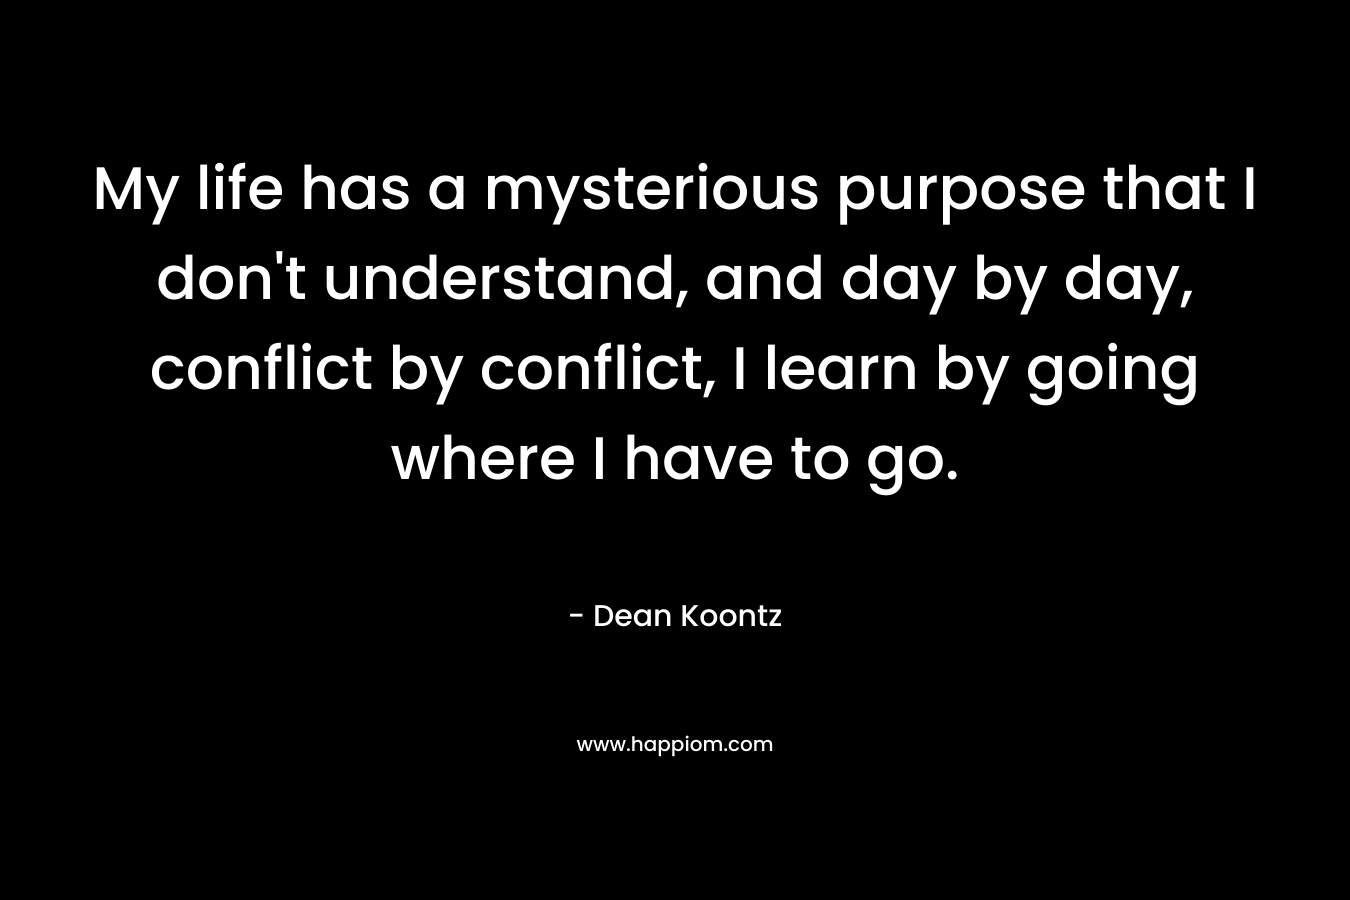 My life has a mysterious purpose that I don’t understand, and day by day, conflict by conflict, I learn by going where I have to go. – Dean Koontz